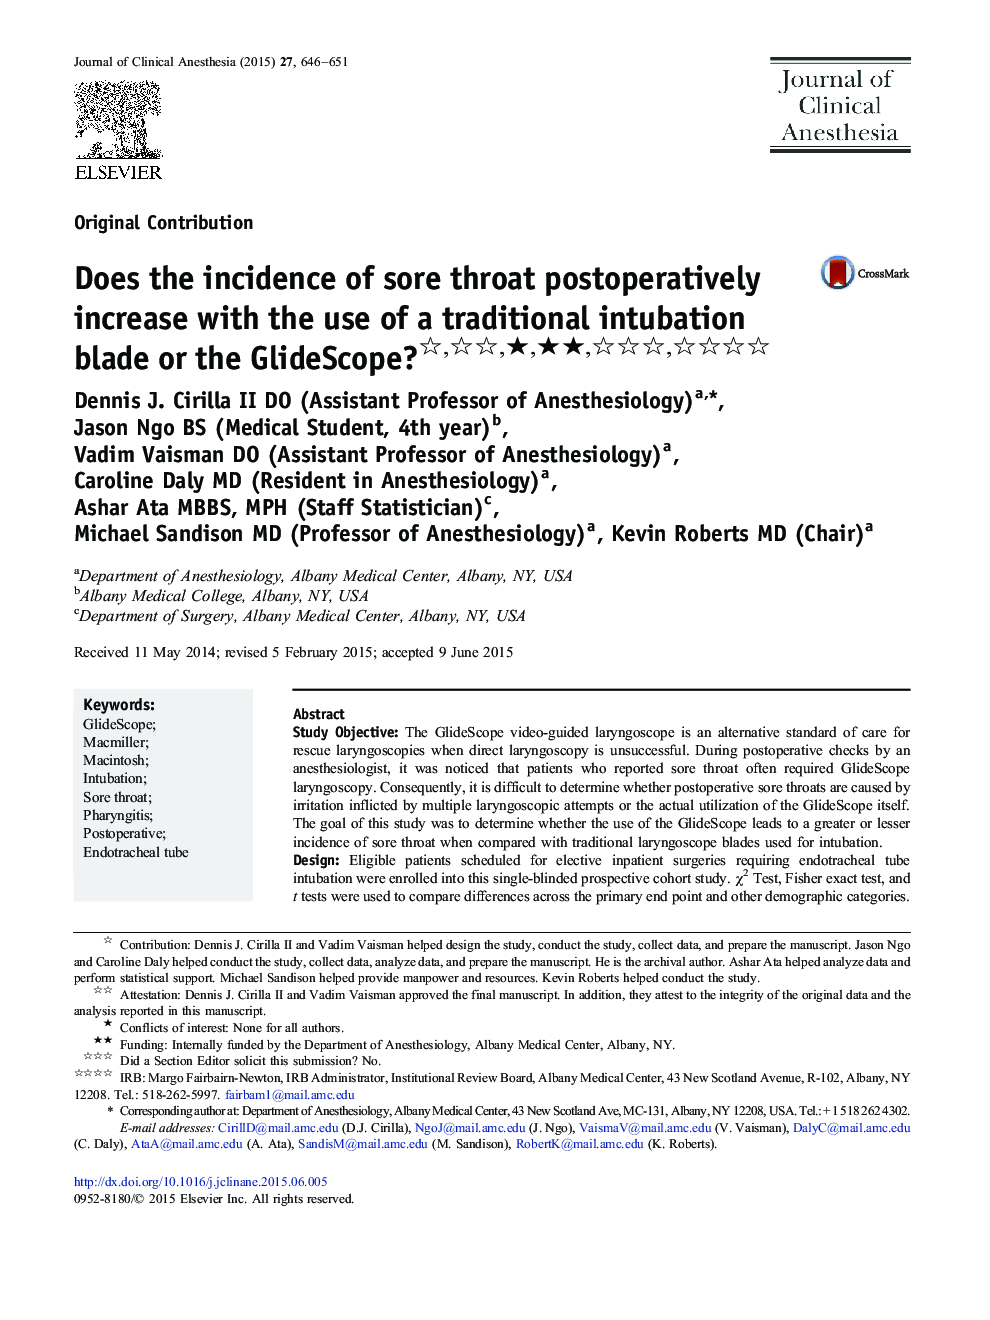 Does the incidence of sore throat postoperatively increase with the use of a traditional intubation blade or the GlideScope? ★★★